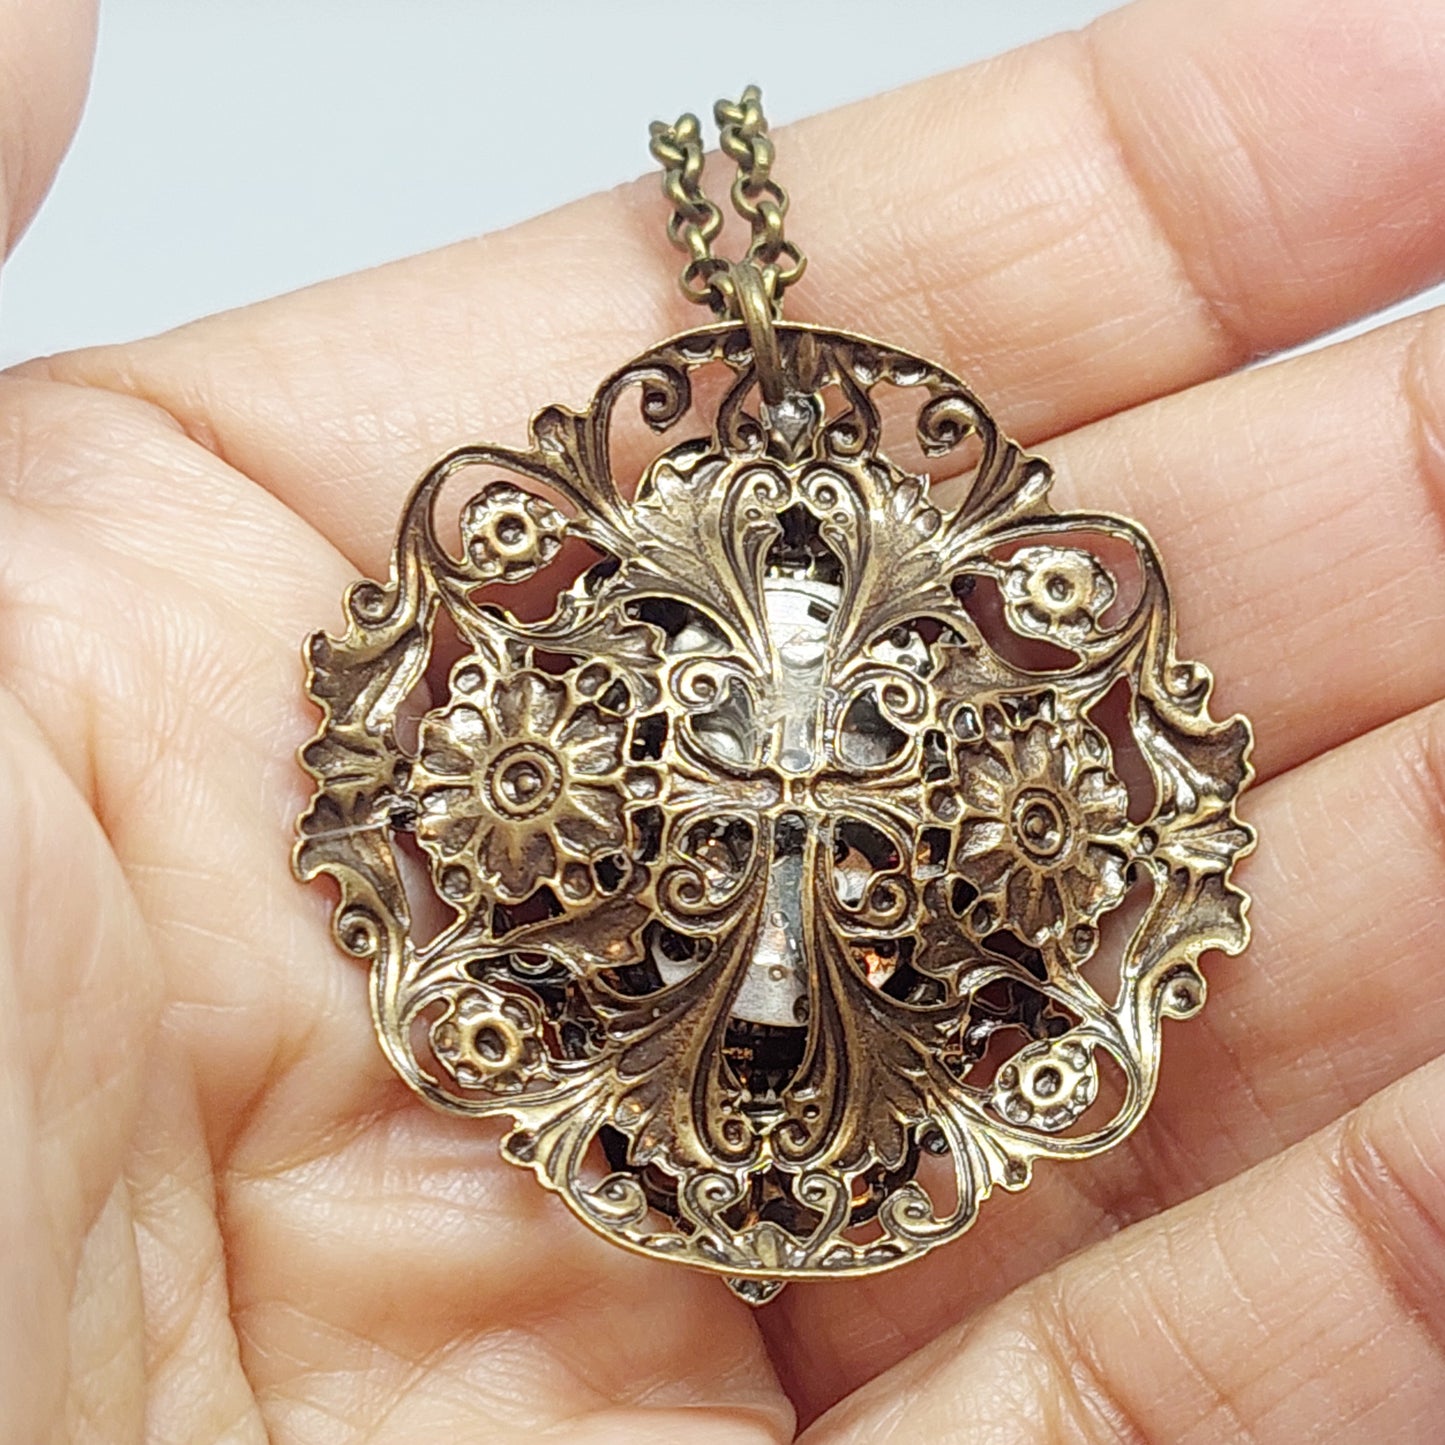 NEW!! Timepiece Ornate Stacked Filigree Pendant with Bee - Brass